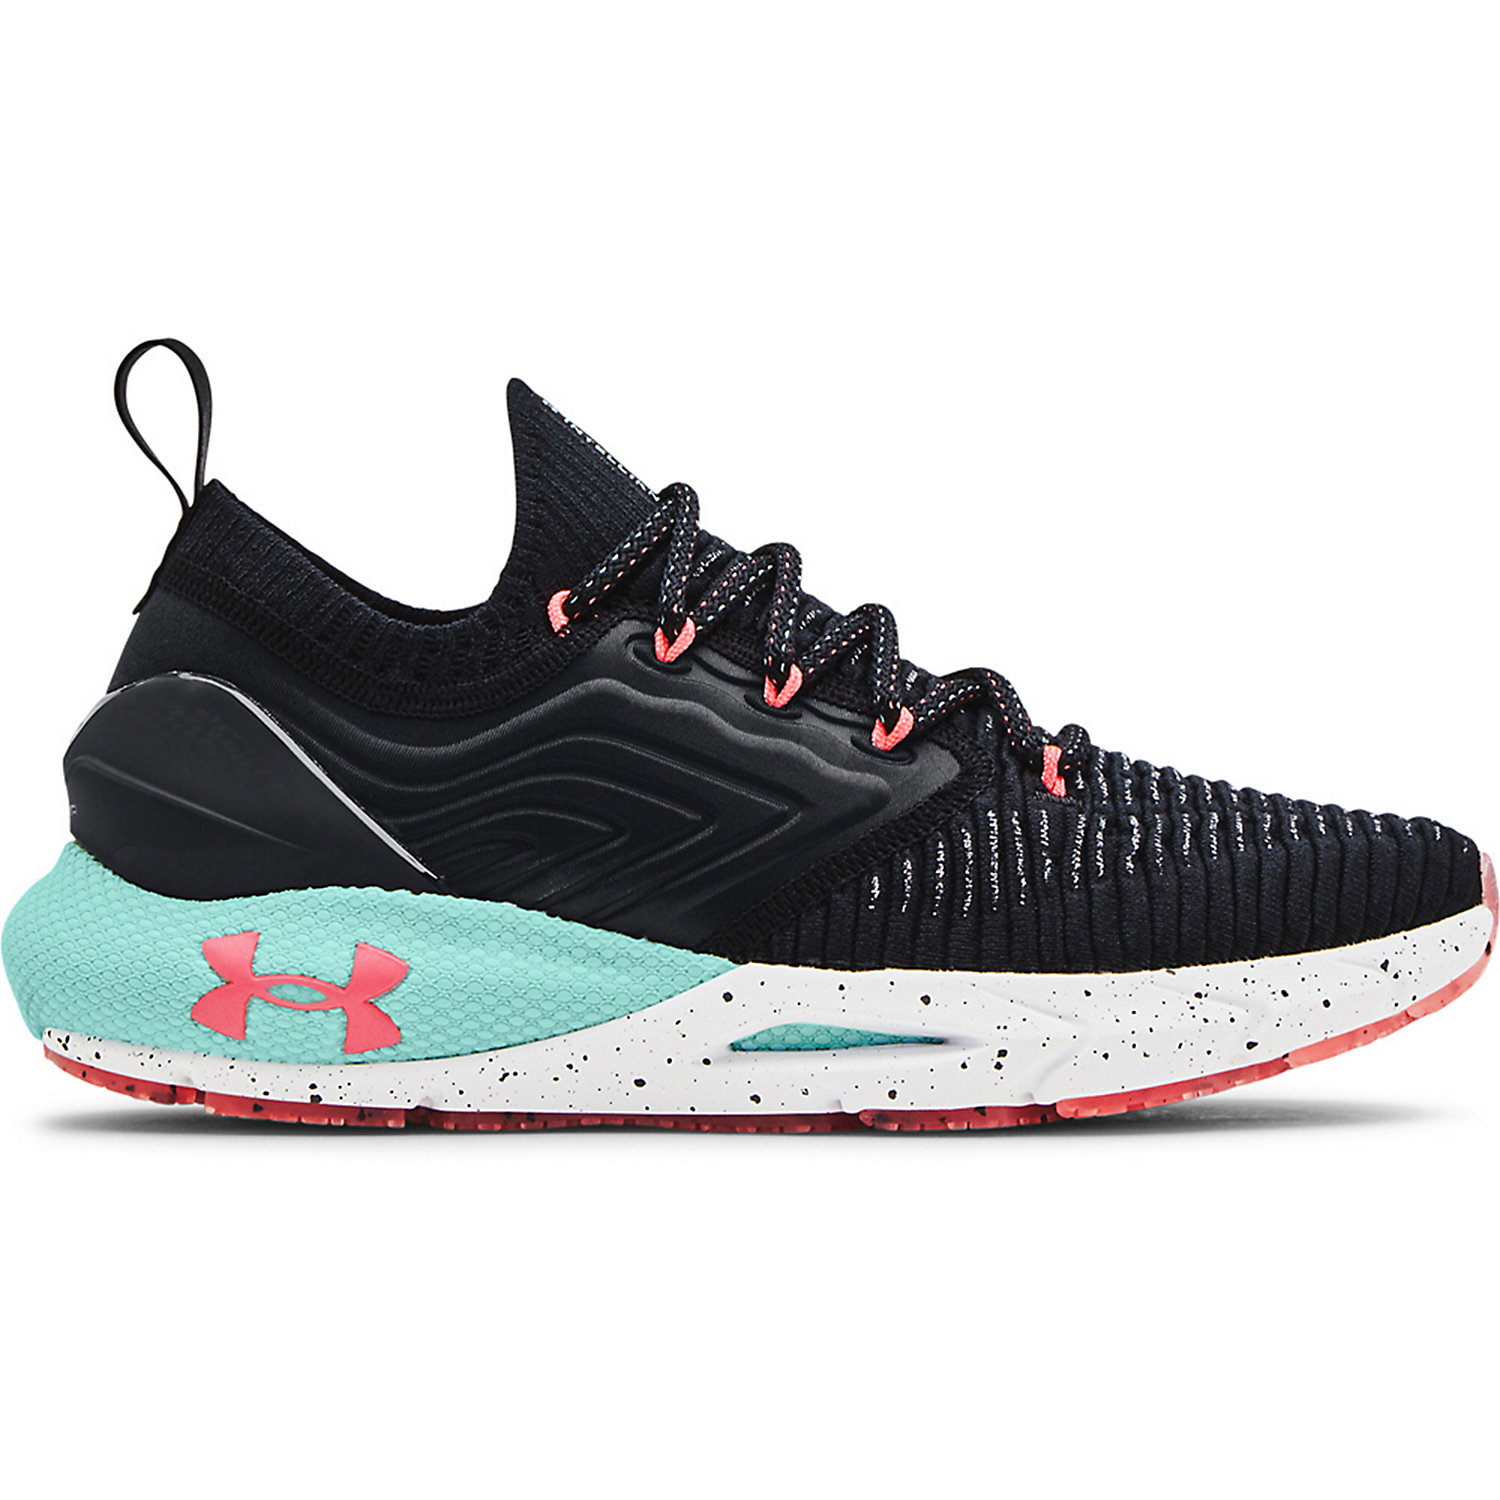 Under Armour Womens HOVR Phantom 2 Inknt PS Shoe